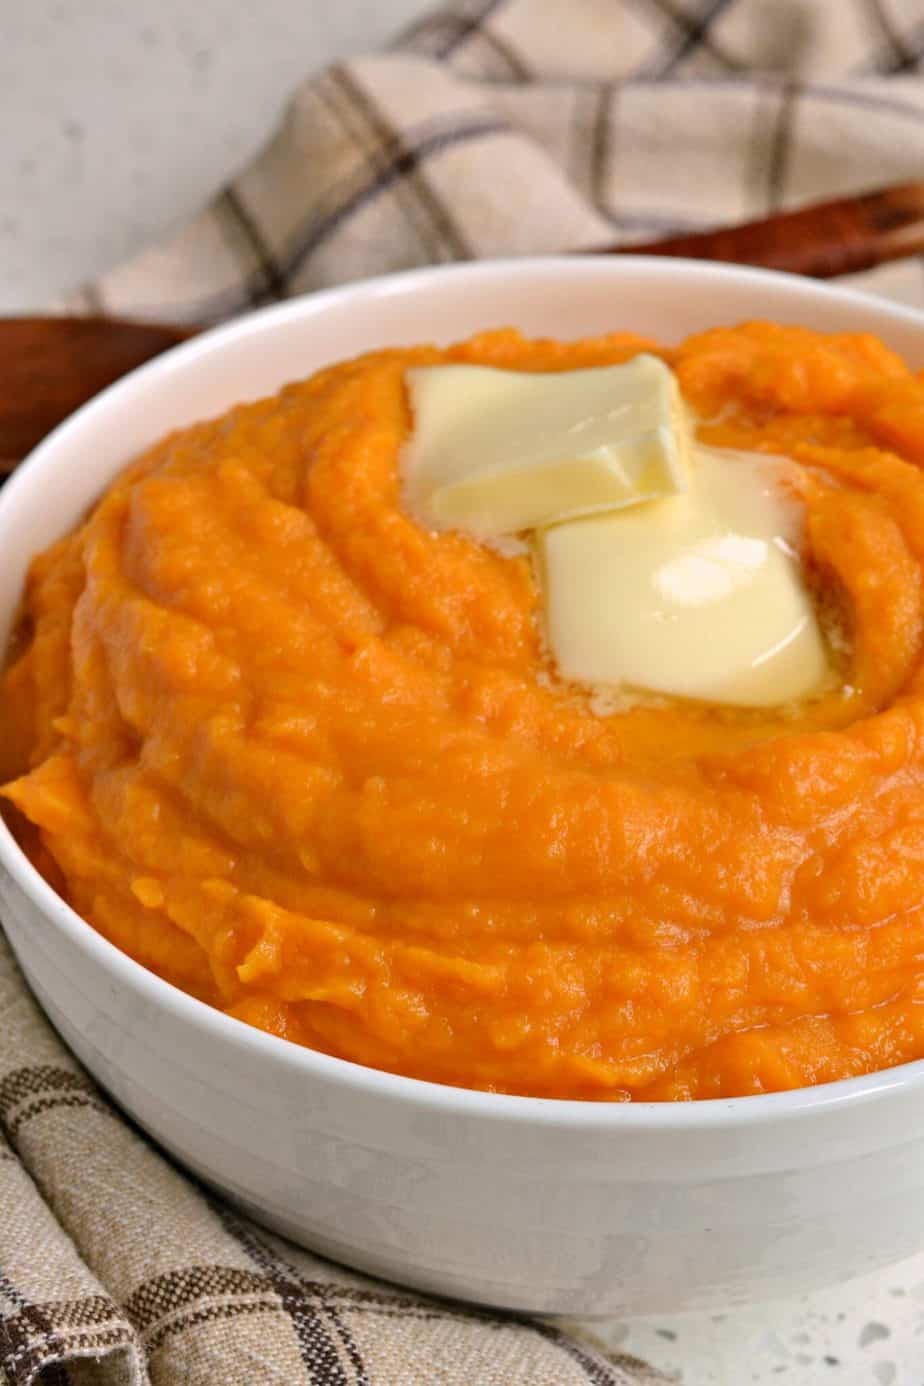 Mashed Sweet Potatoes (Ultra Smooth and Creamy)